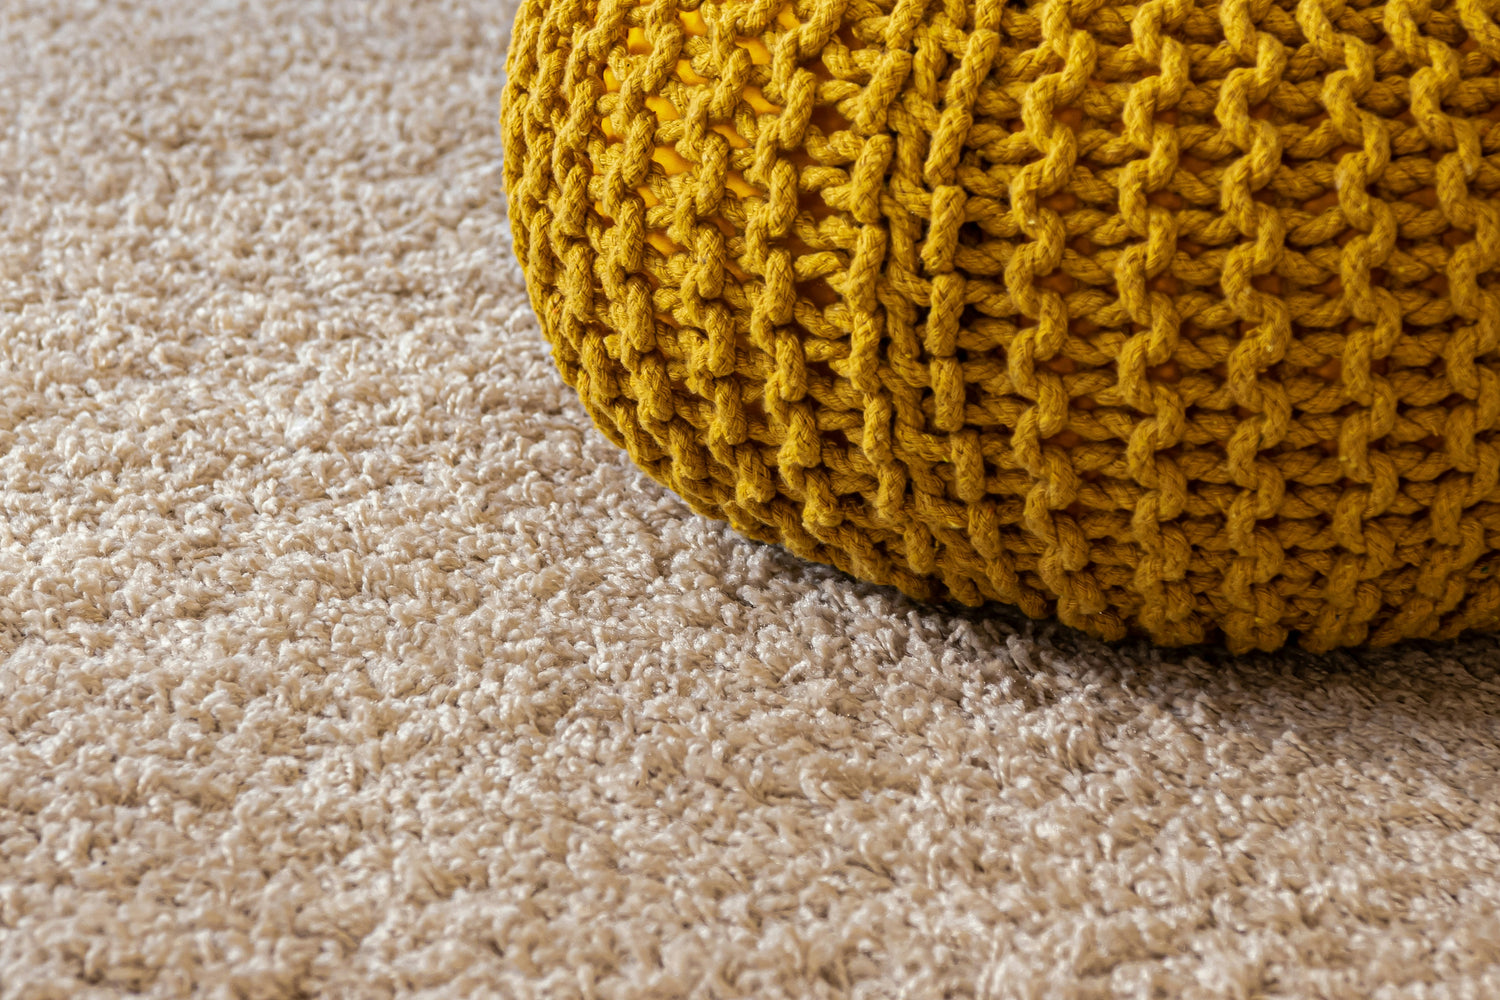 How to Protect Carpet From Furniture Legs